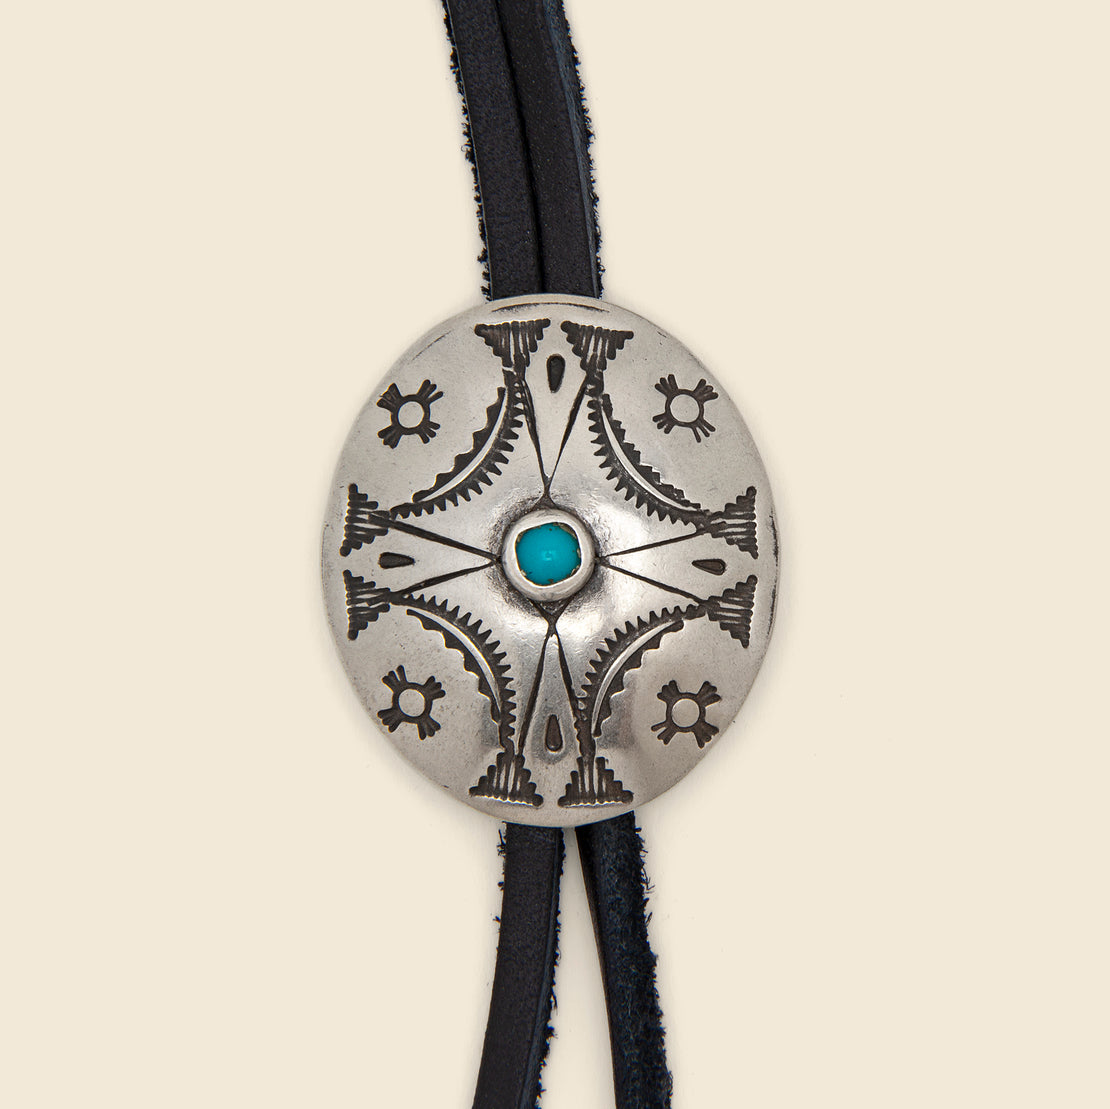 Leather Bolo Tie - Nickel Silver/Turquoise/Leather